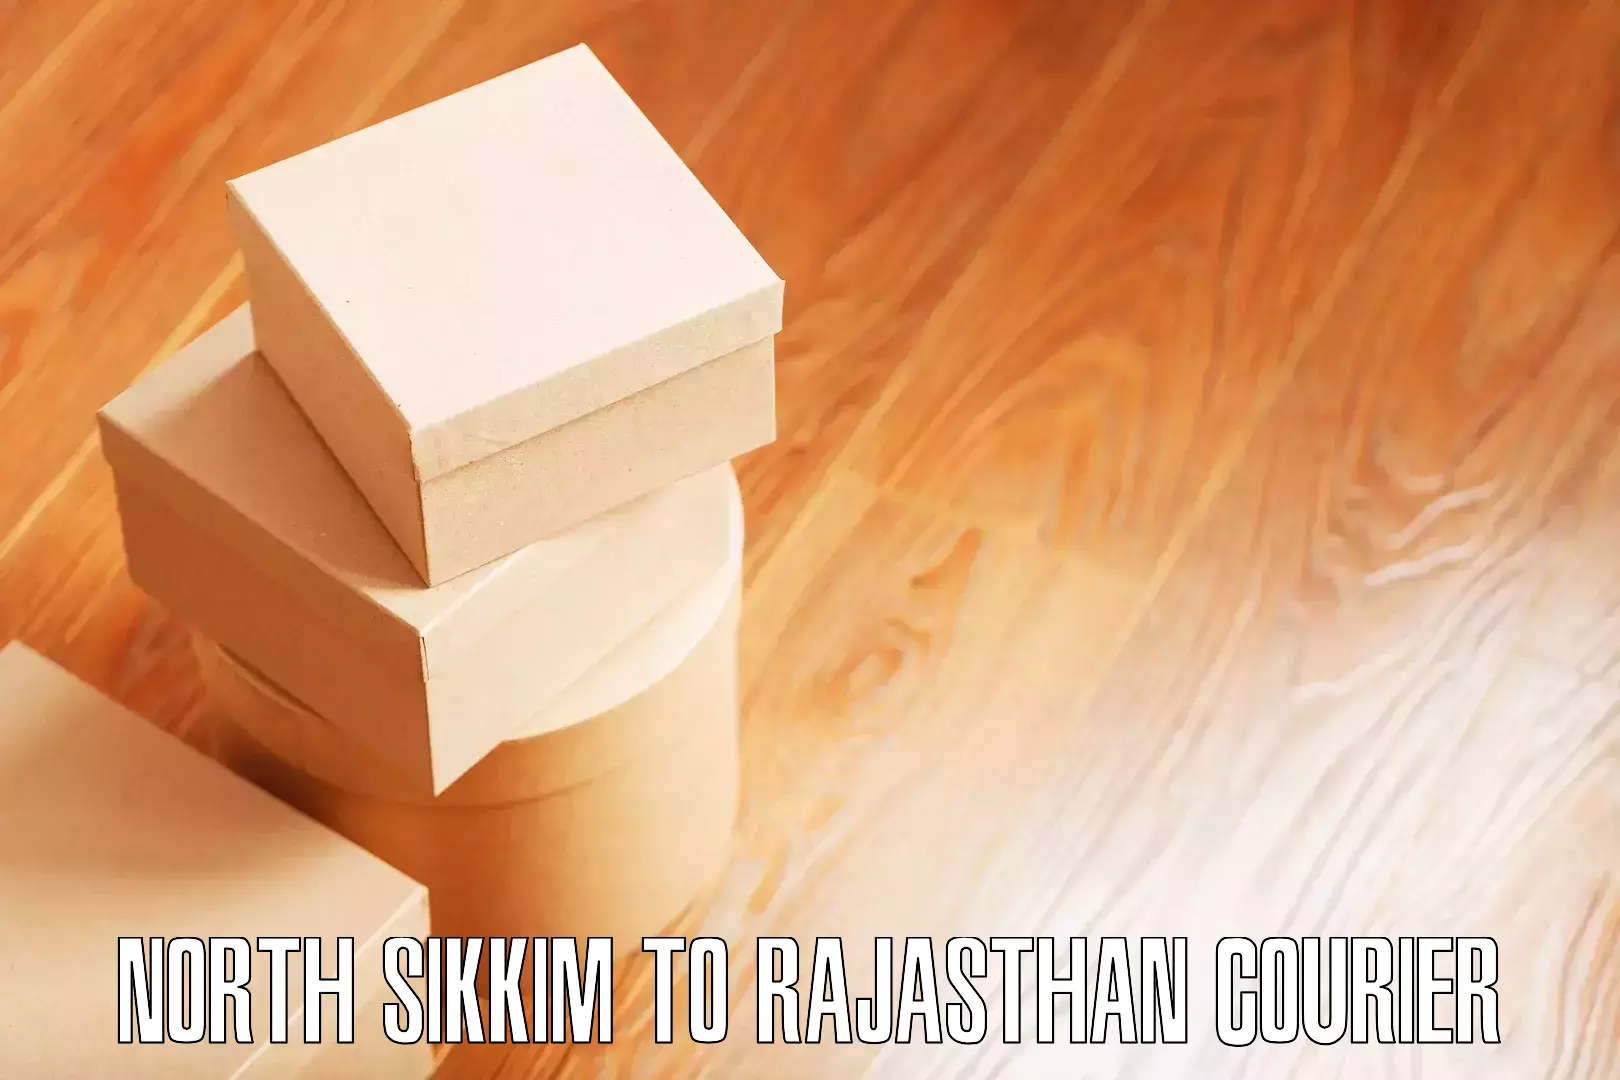 Efficient packing and moving North Sikkim to Rajasthan